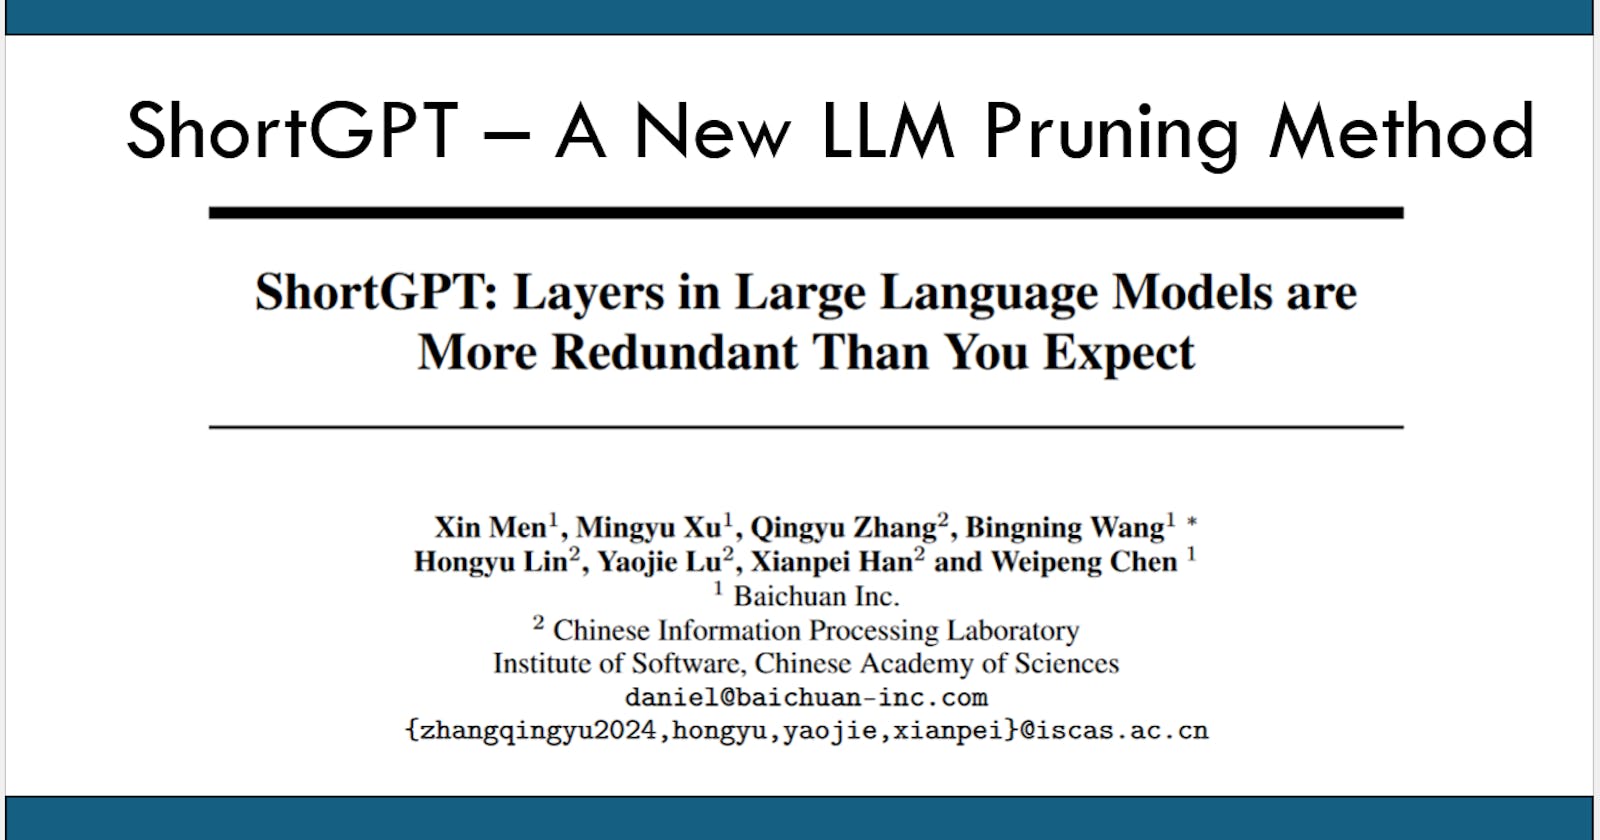 ShortGPT: Layers in Large Language Models are
More Redundant Than You Expect (short summary)